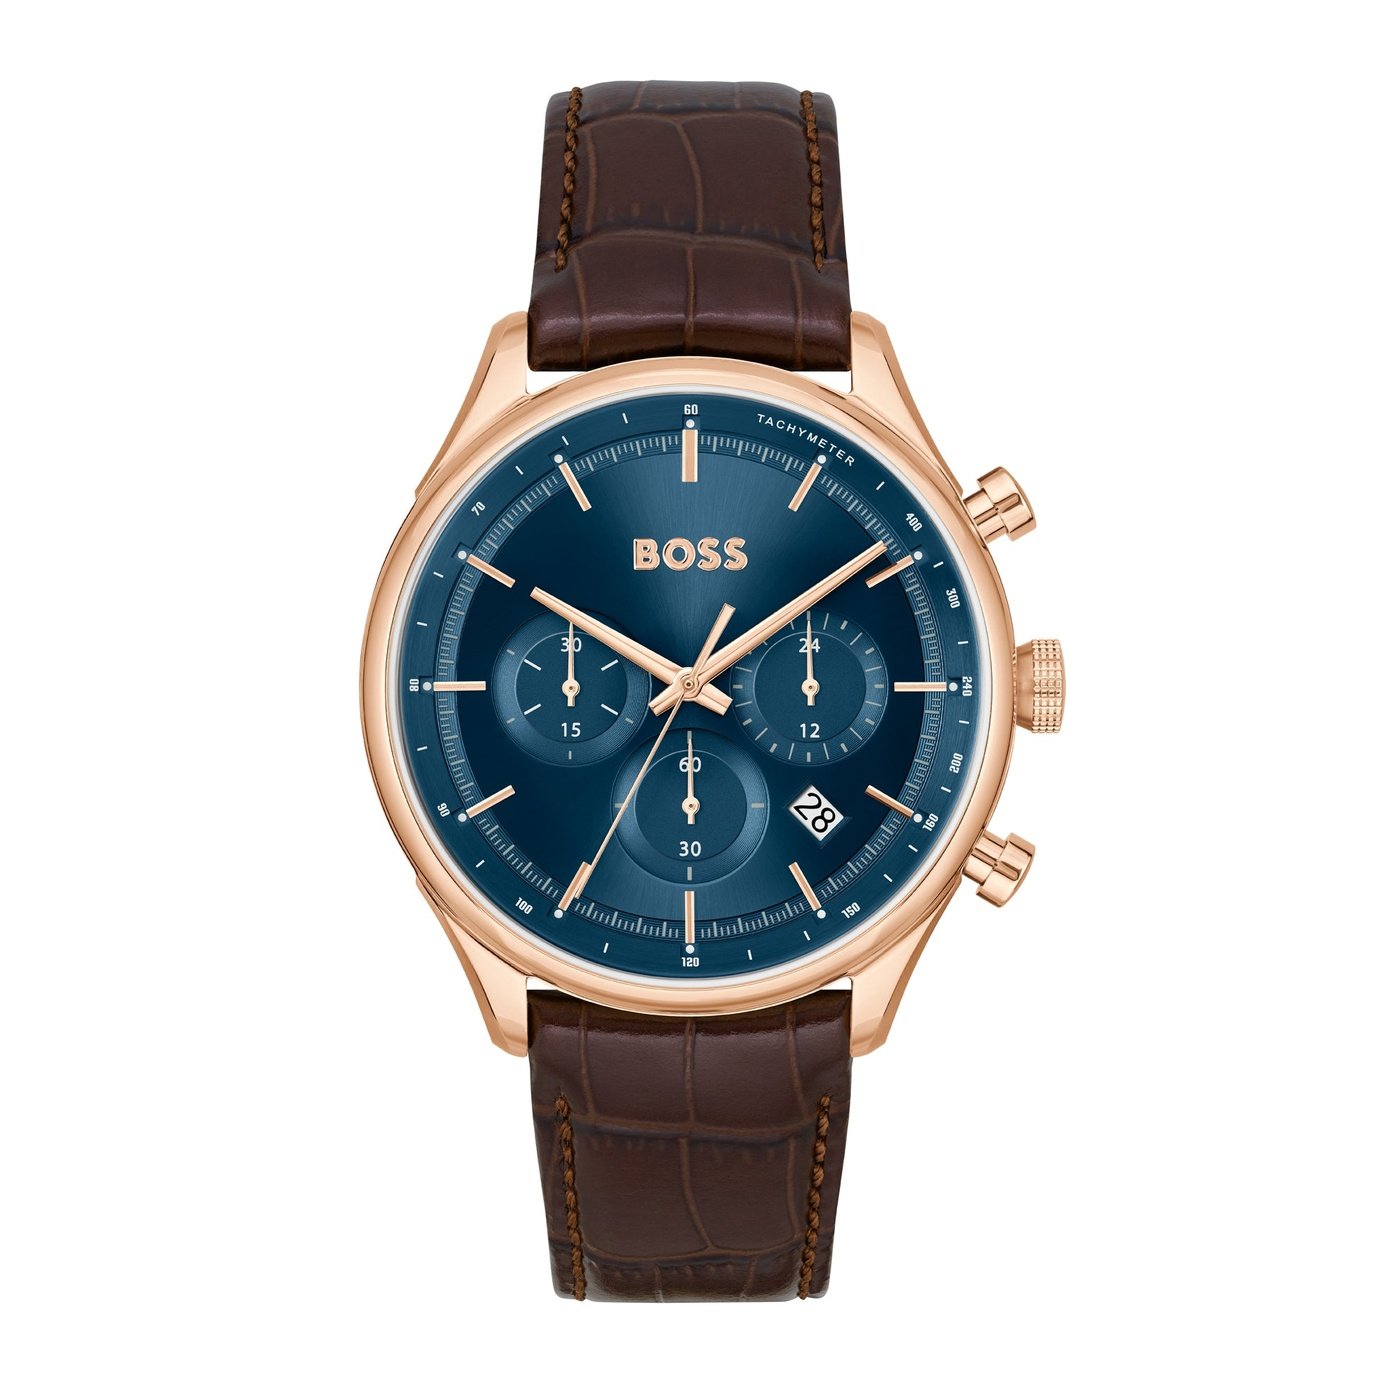 HUGO BOSS Watches For Men And Women | Shop Online Now